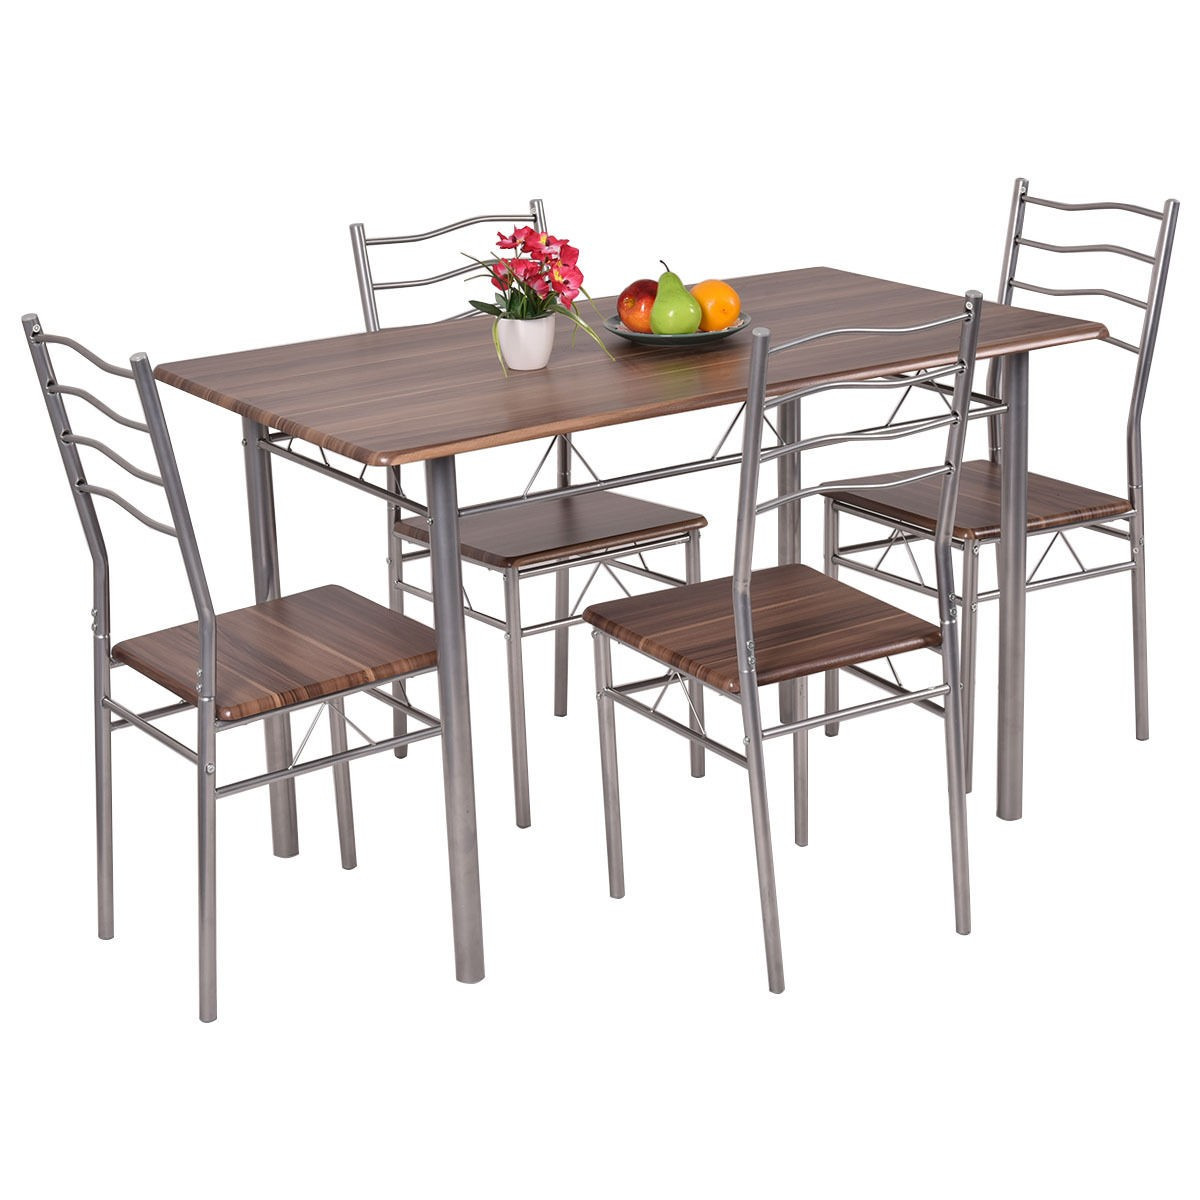 Modern Kitchen Table And Chairs
 5 Piece Dining Set Wood Metal Table and 4 Chairs Kitchen